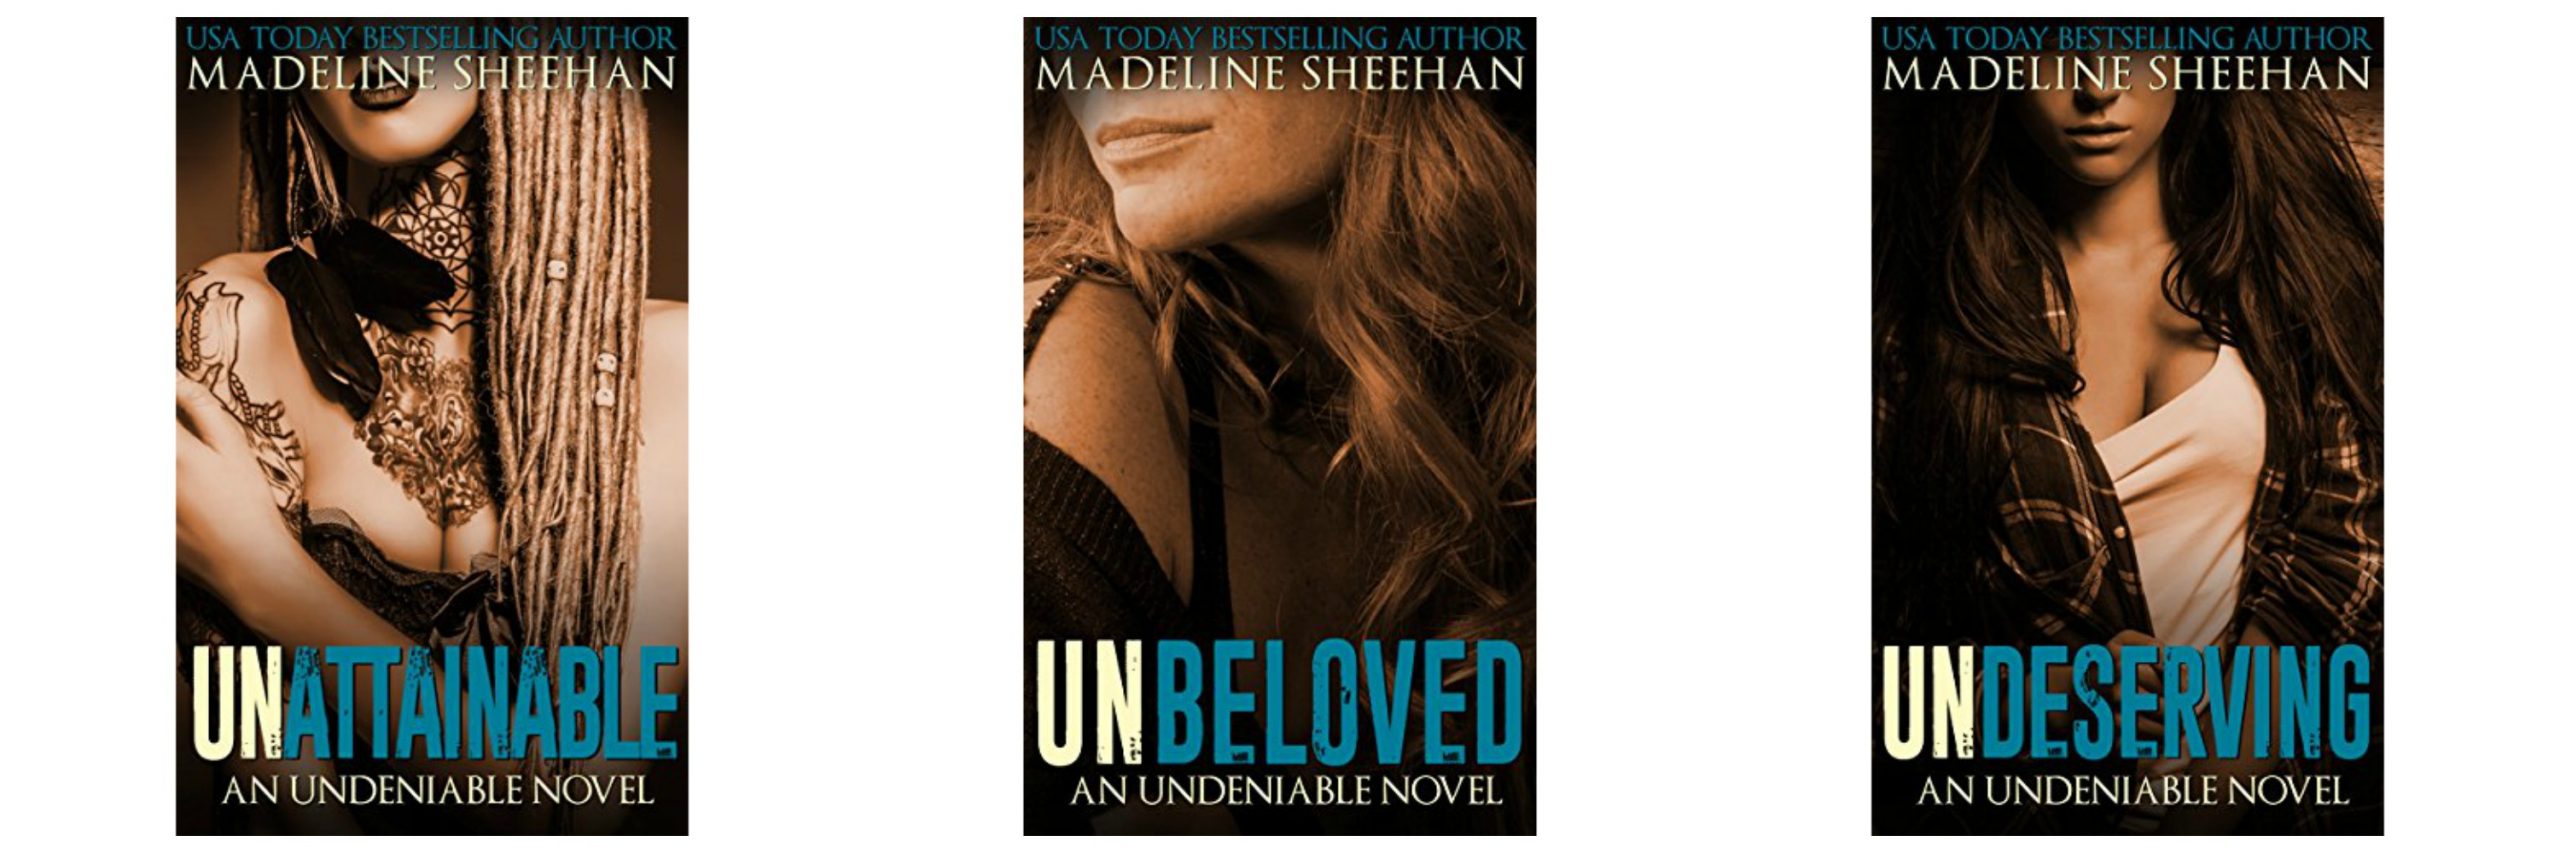 Undeniable Series by Madeline Sheehan | Reviews on www.bxtchesbeblogging.com